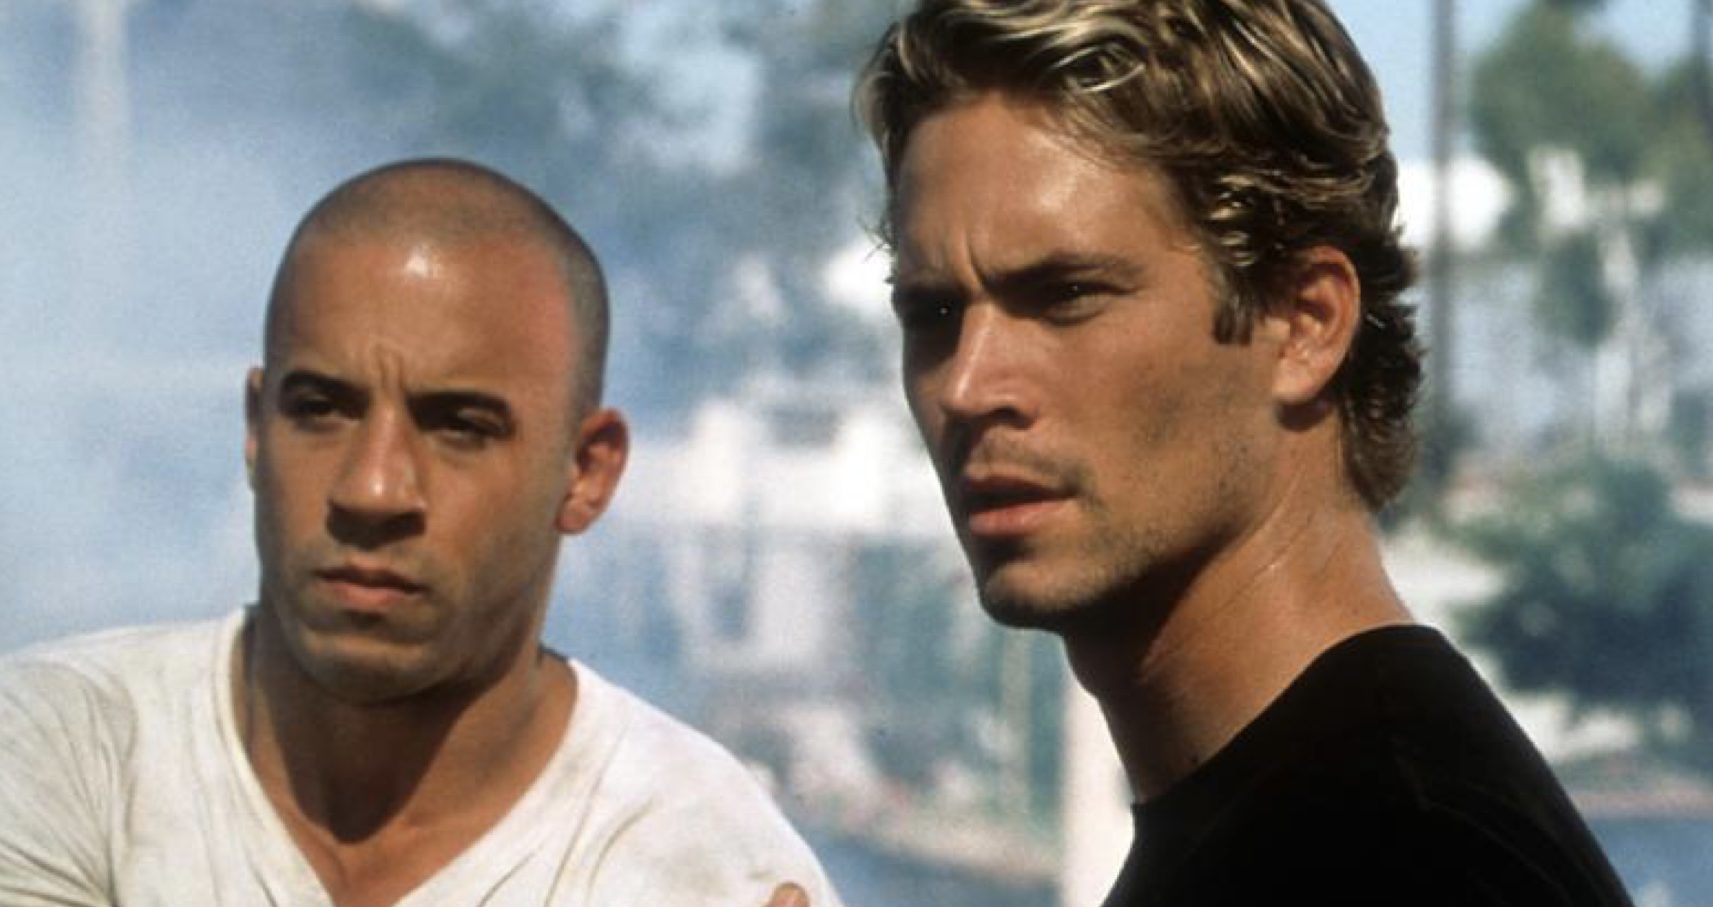 Paul Walker and Vin Diesel have starred alongside each other in the Fast & Furious franchise